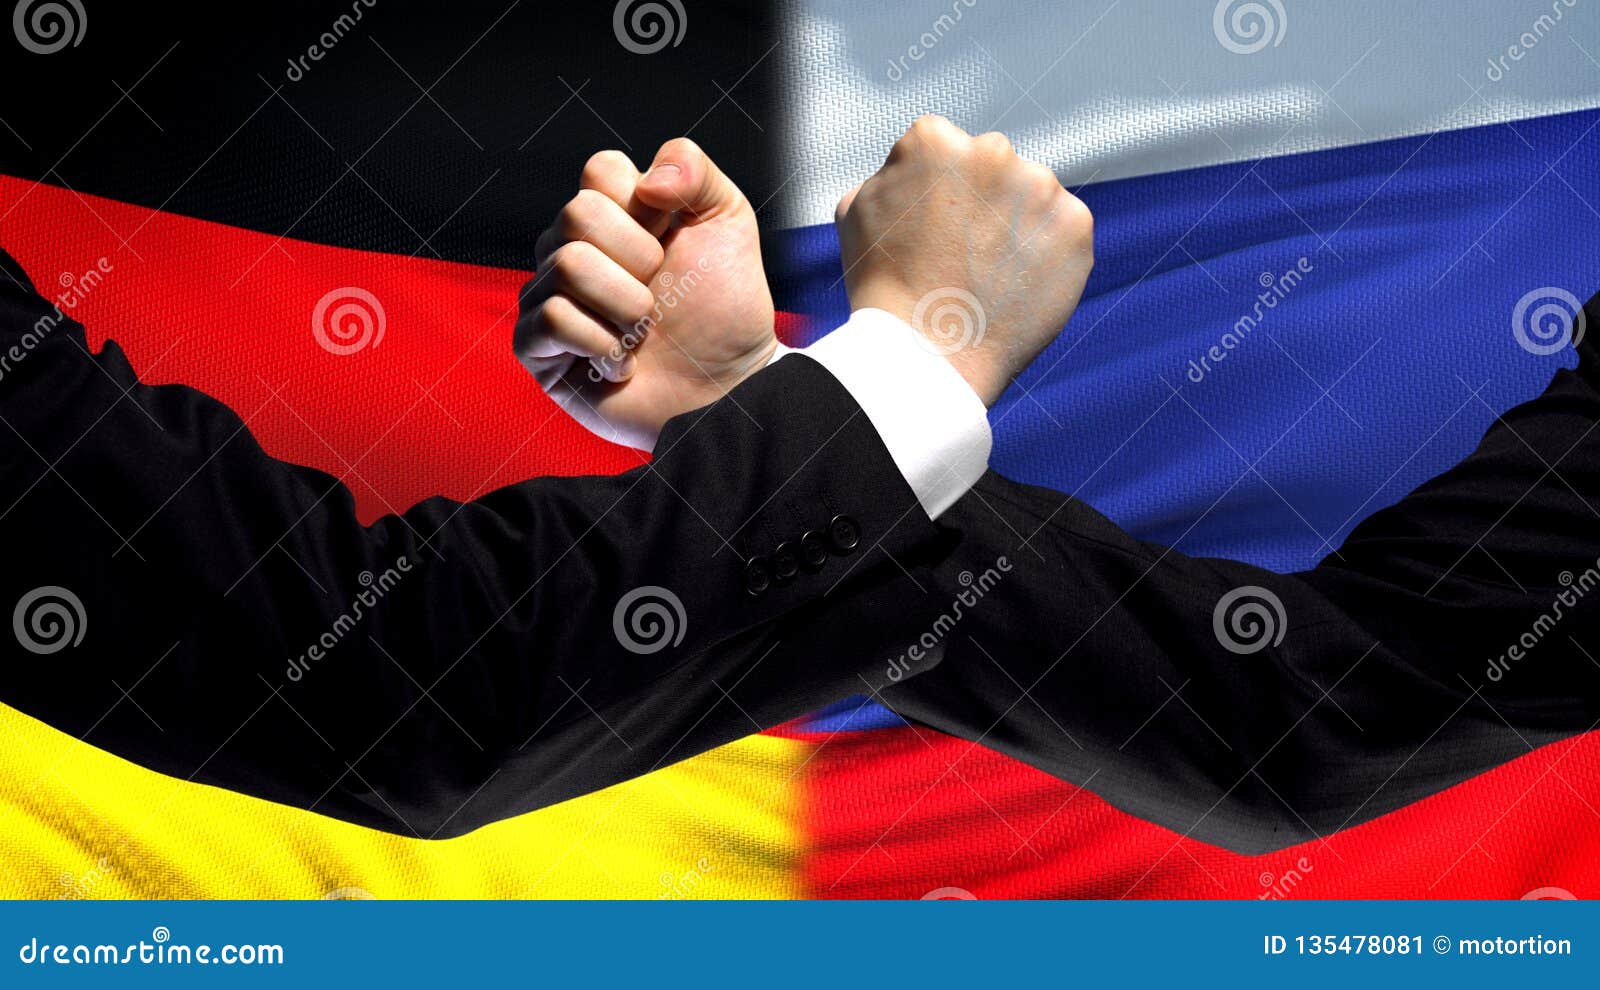 Germany Vs Russia Confrontation Countries Disagreement Fists On Flag